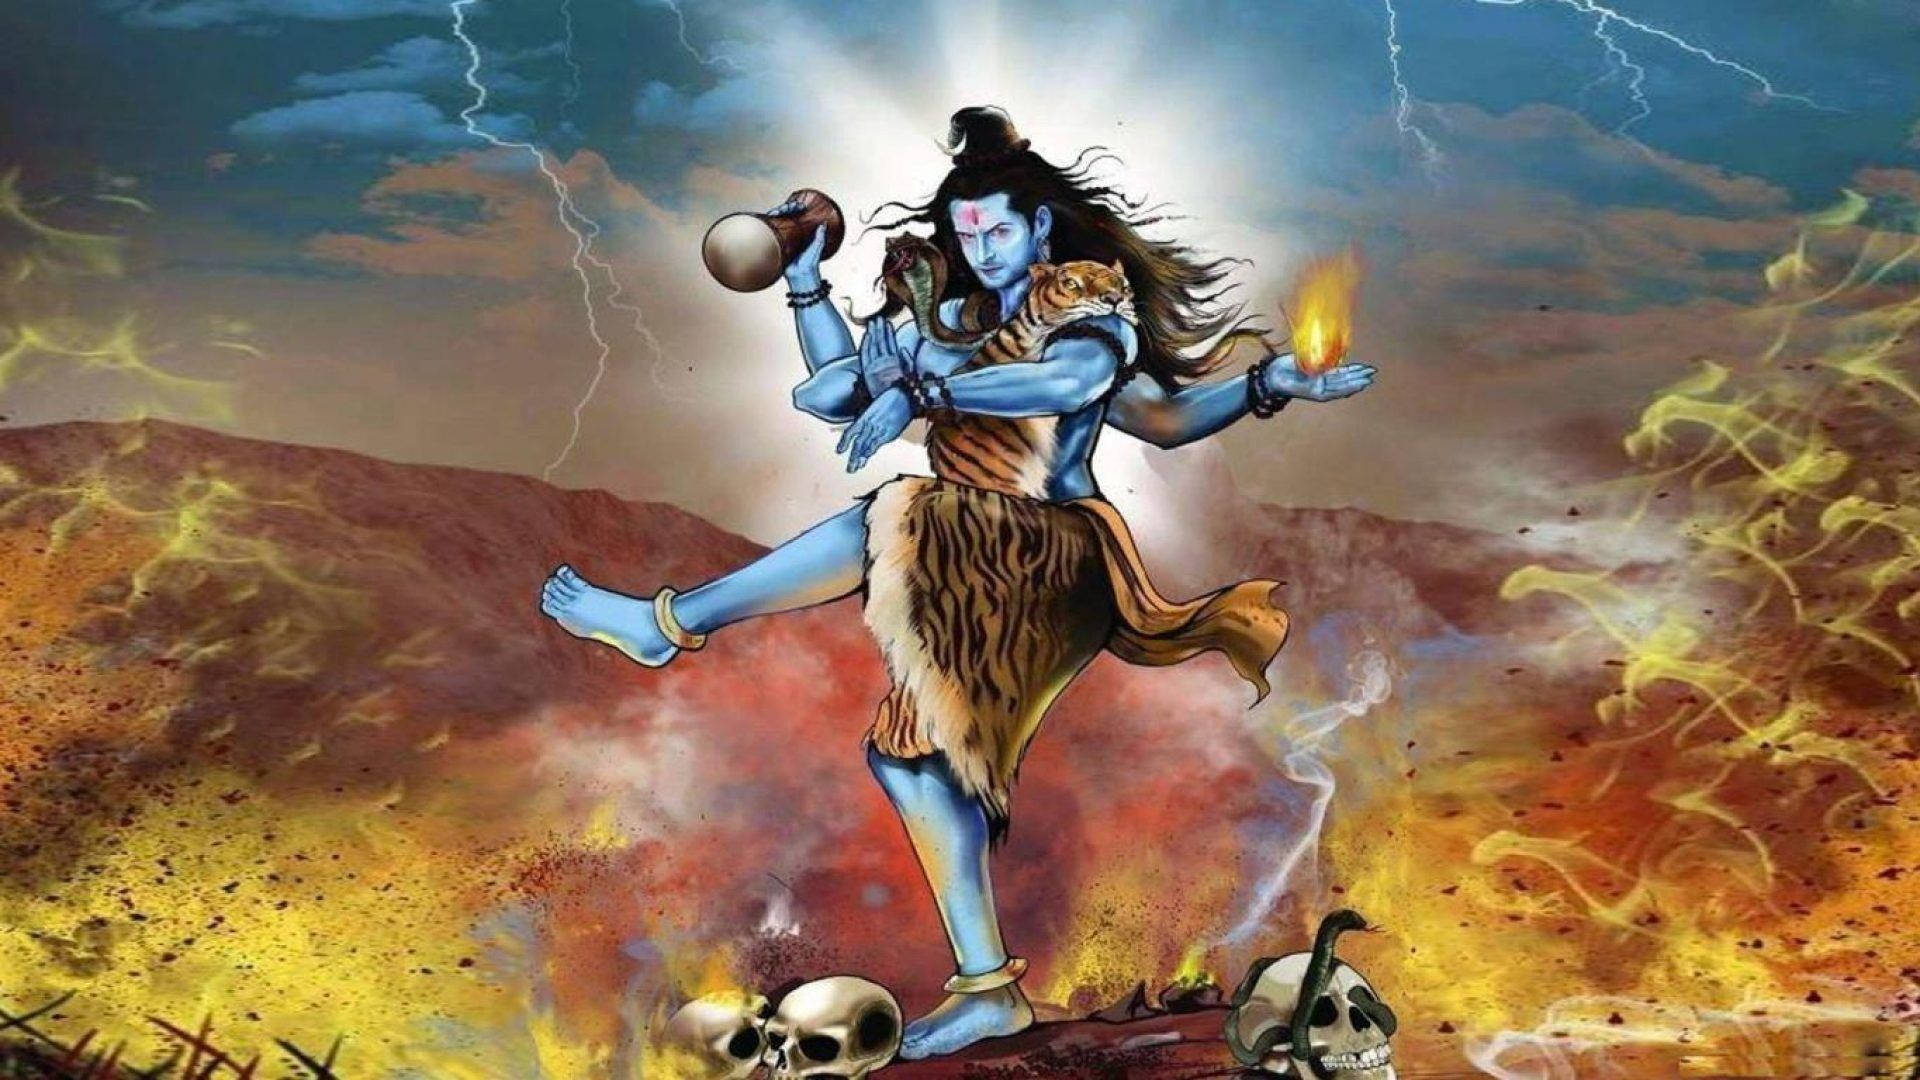 Free Angry Shiva Wallpaper Downloads, [100+] Angry Shiva Wallpapers for  FREE 